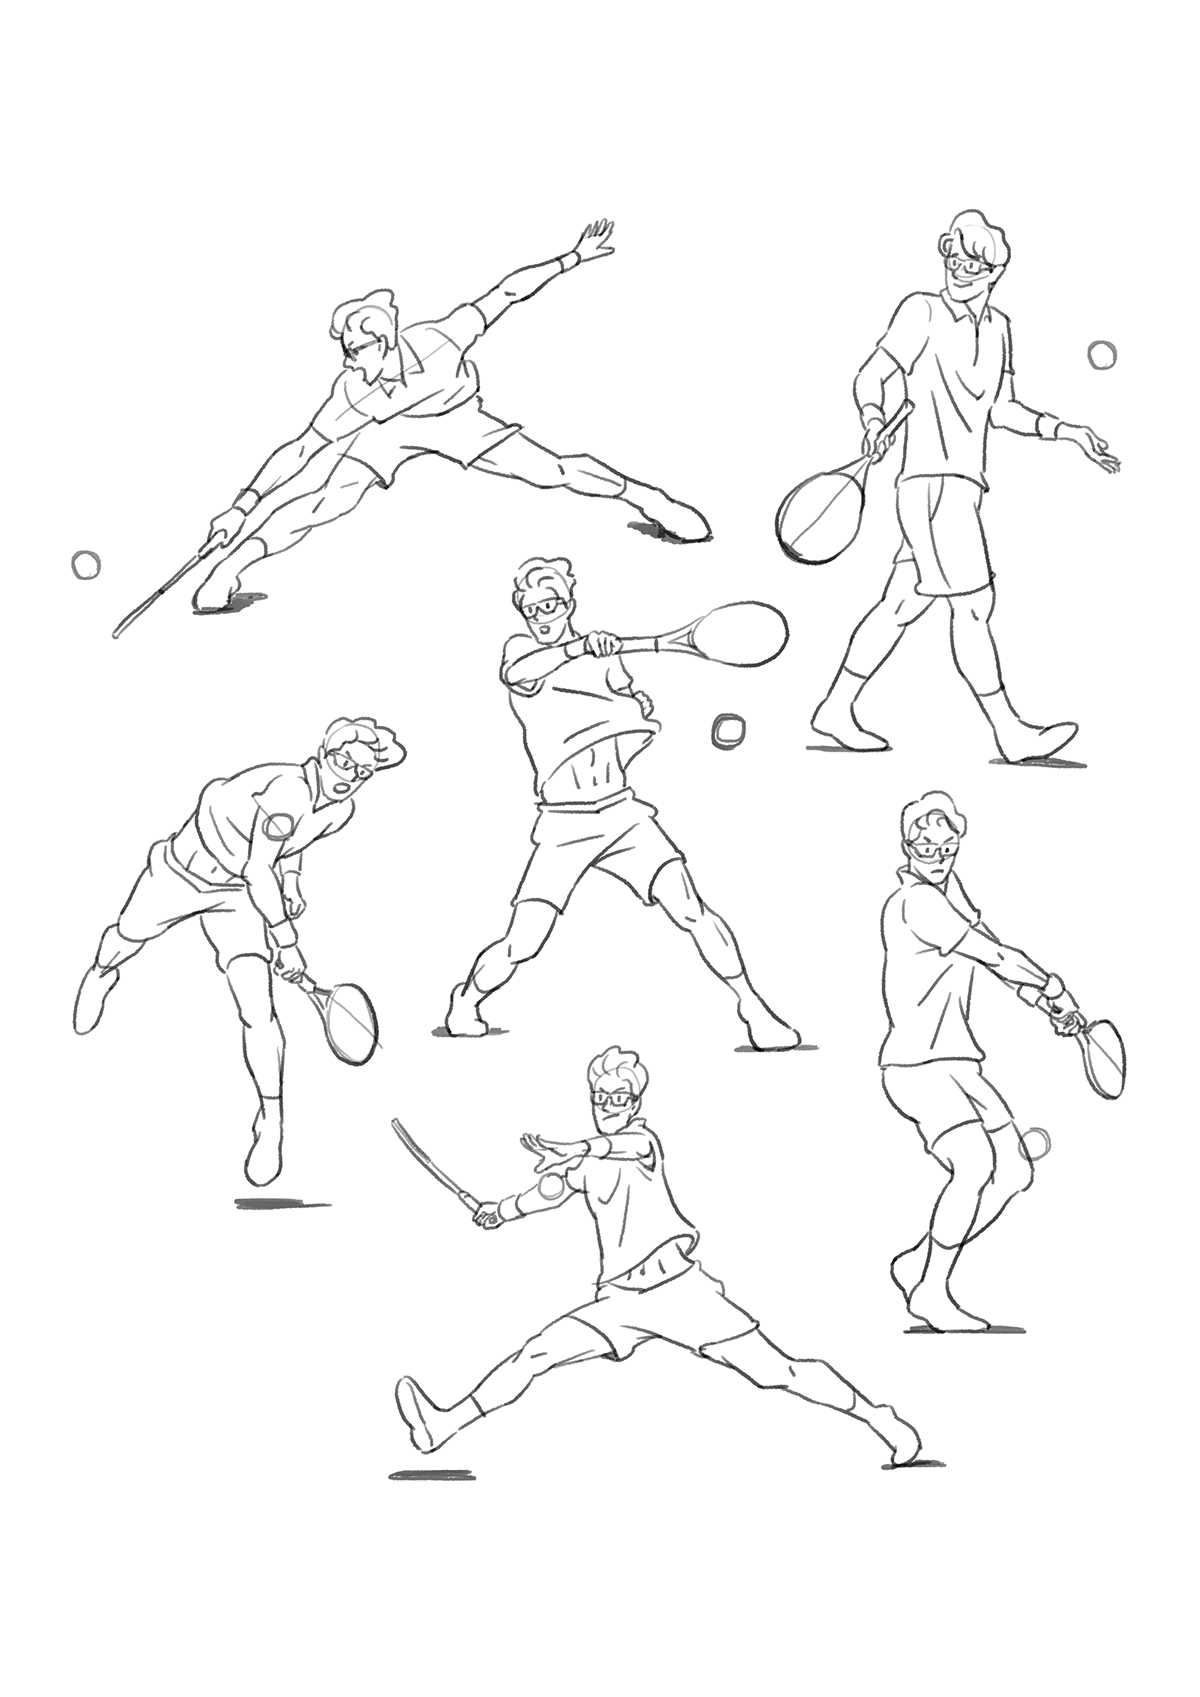 illust ILLUSTRATION  graphic design Character Drawing  artwork our own night korean tennis player